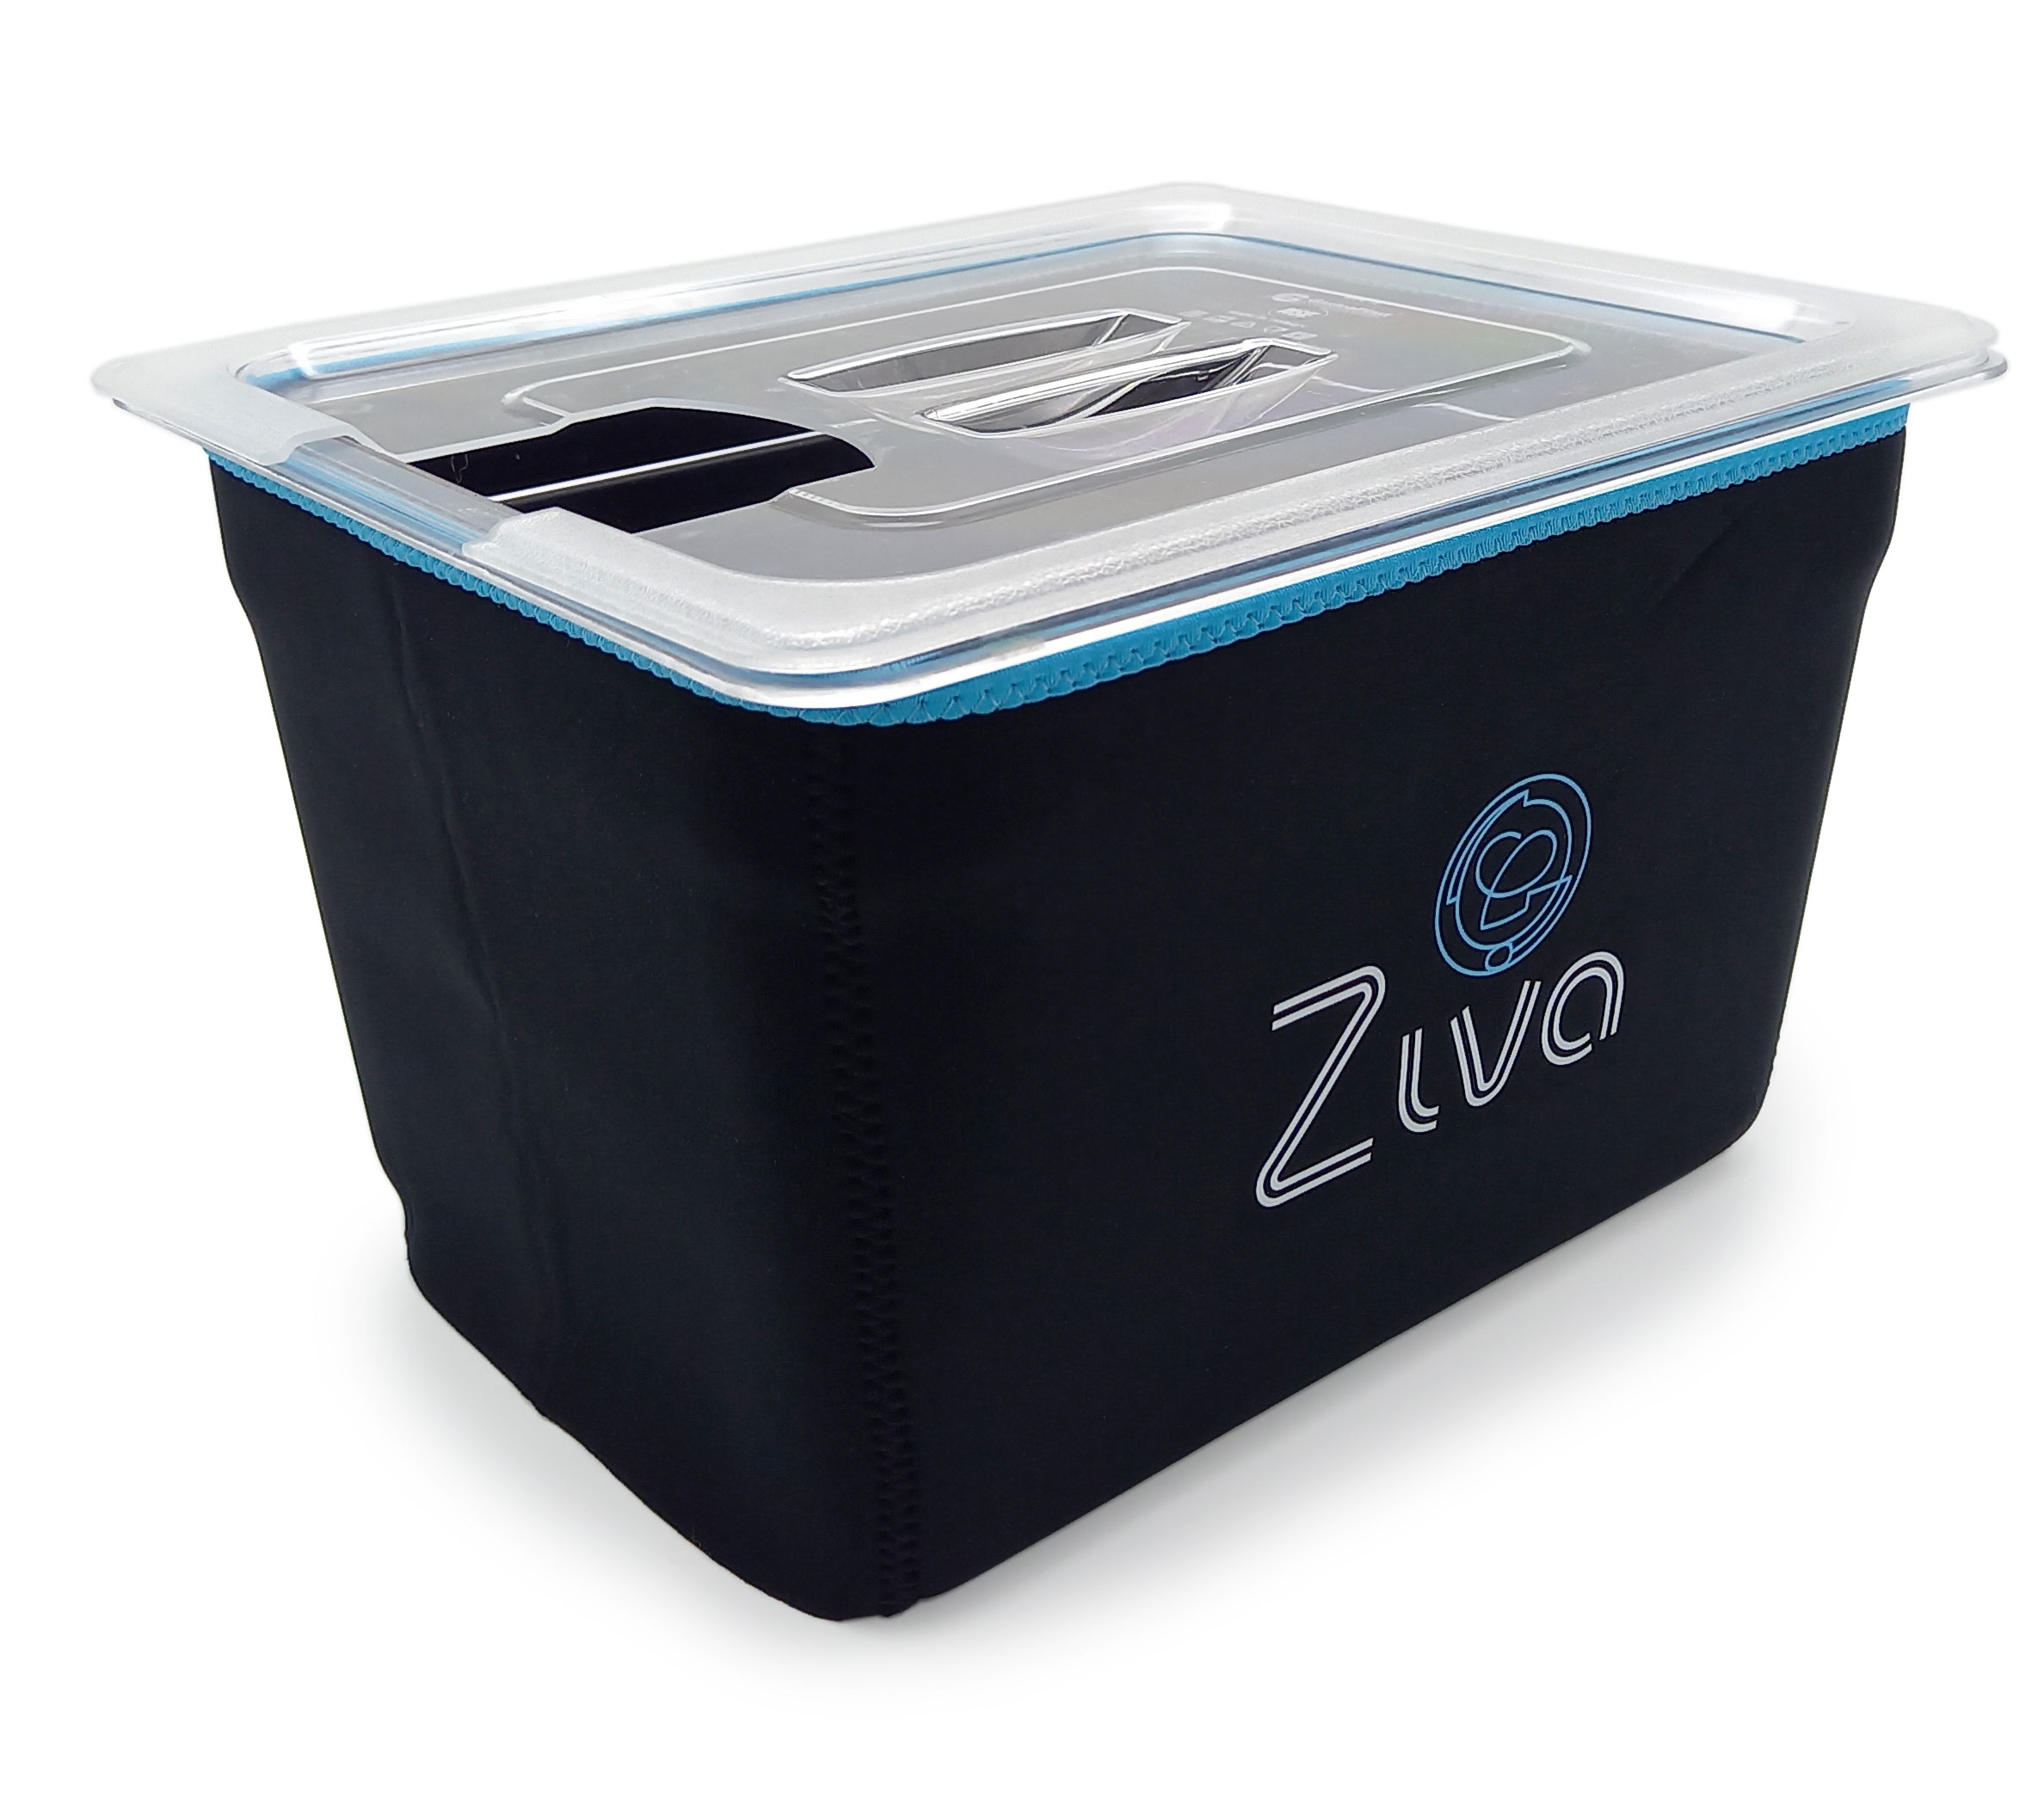 Ziva Sous vide Insolation Cover /Sleeve (M)